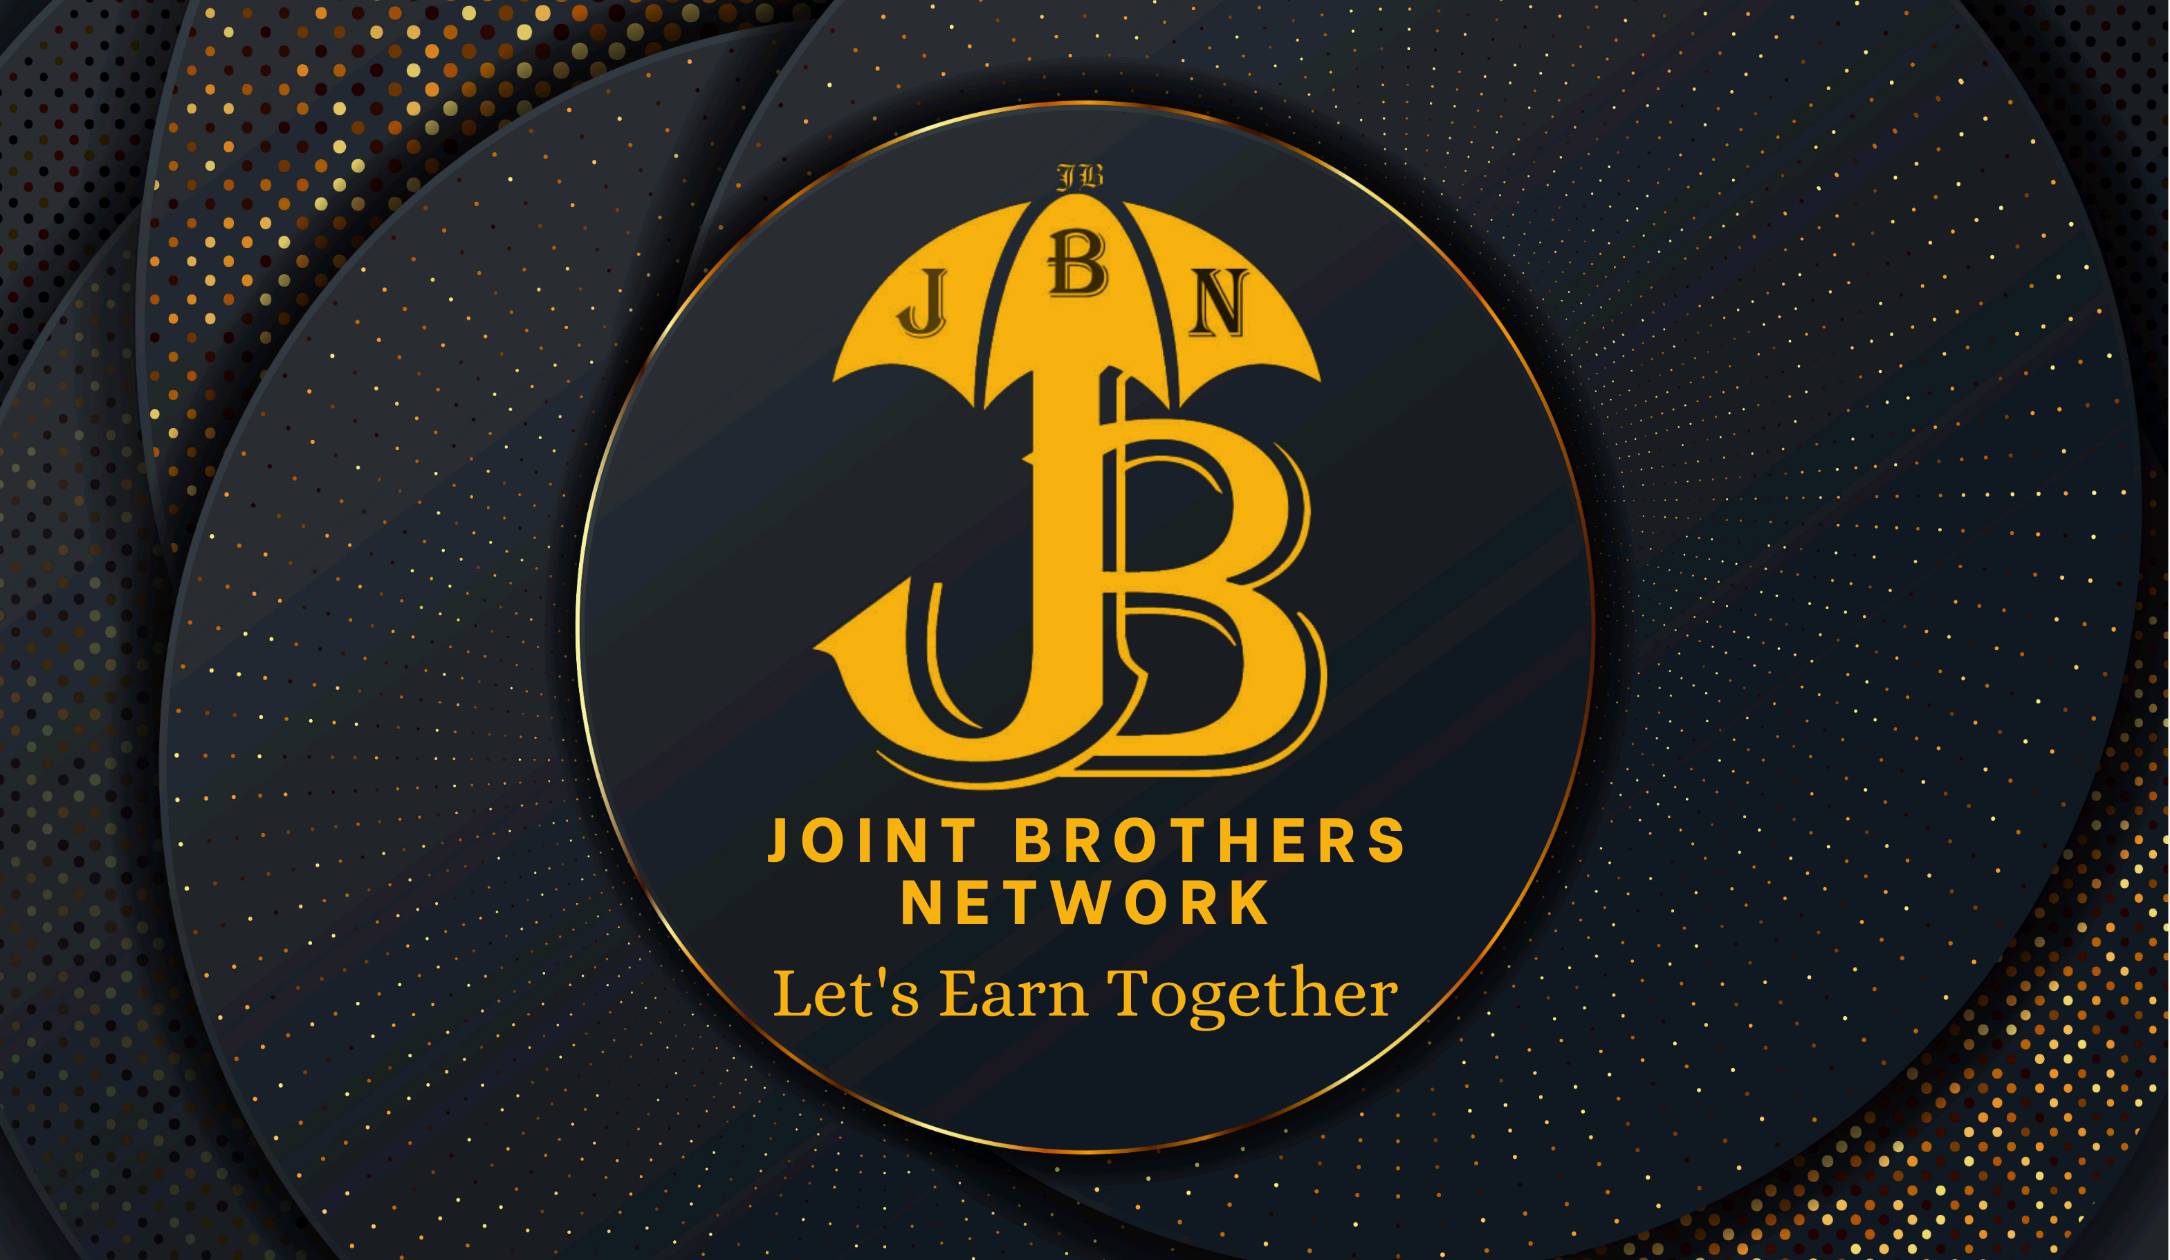 Joint Brothers Network